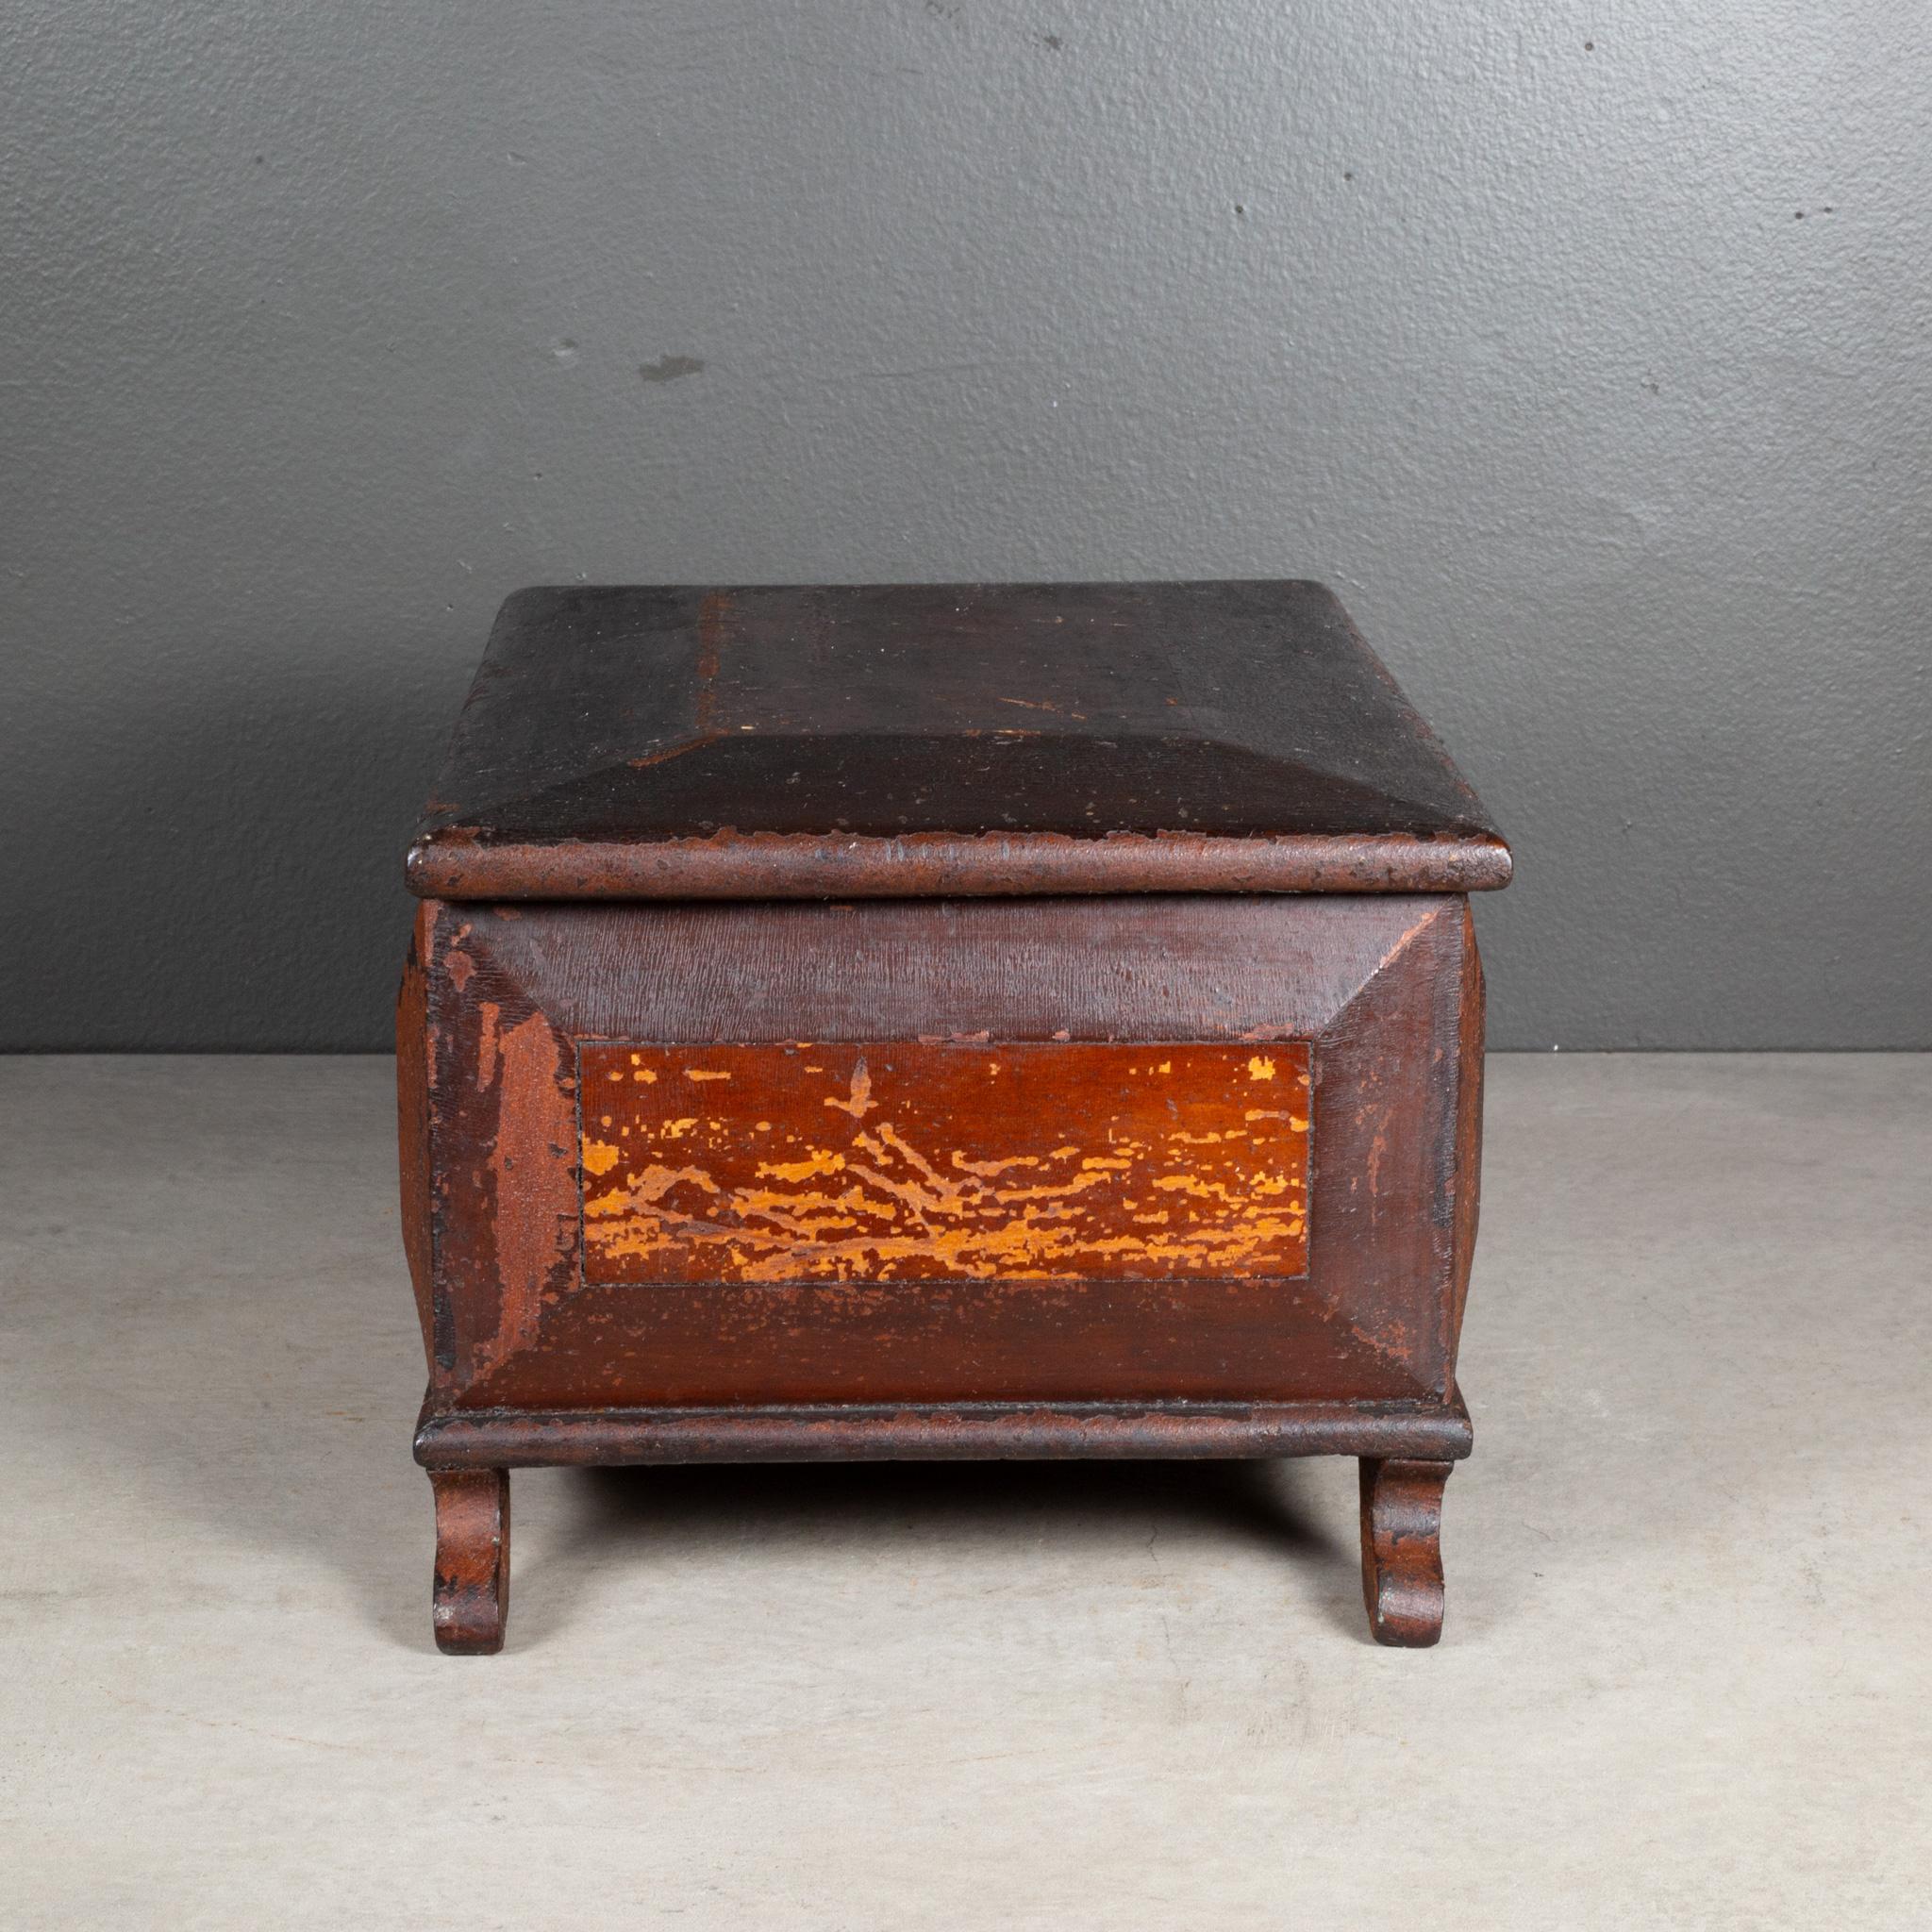 Victorian 19th c. Distressed Scroll-Footed Box For Sale